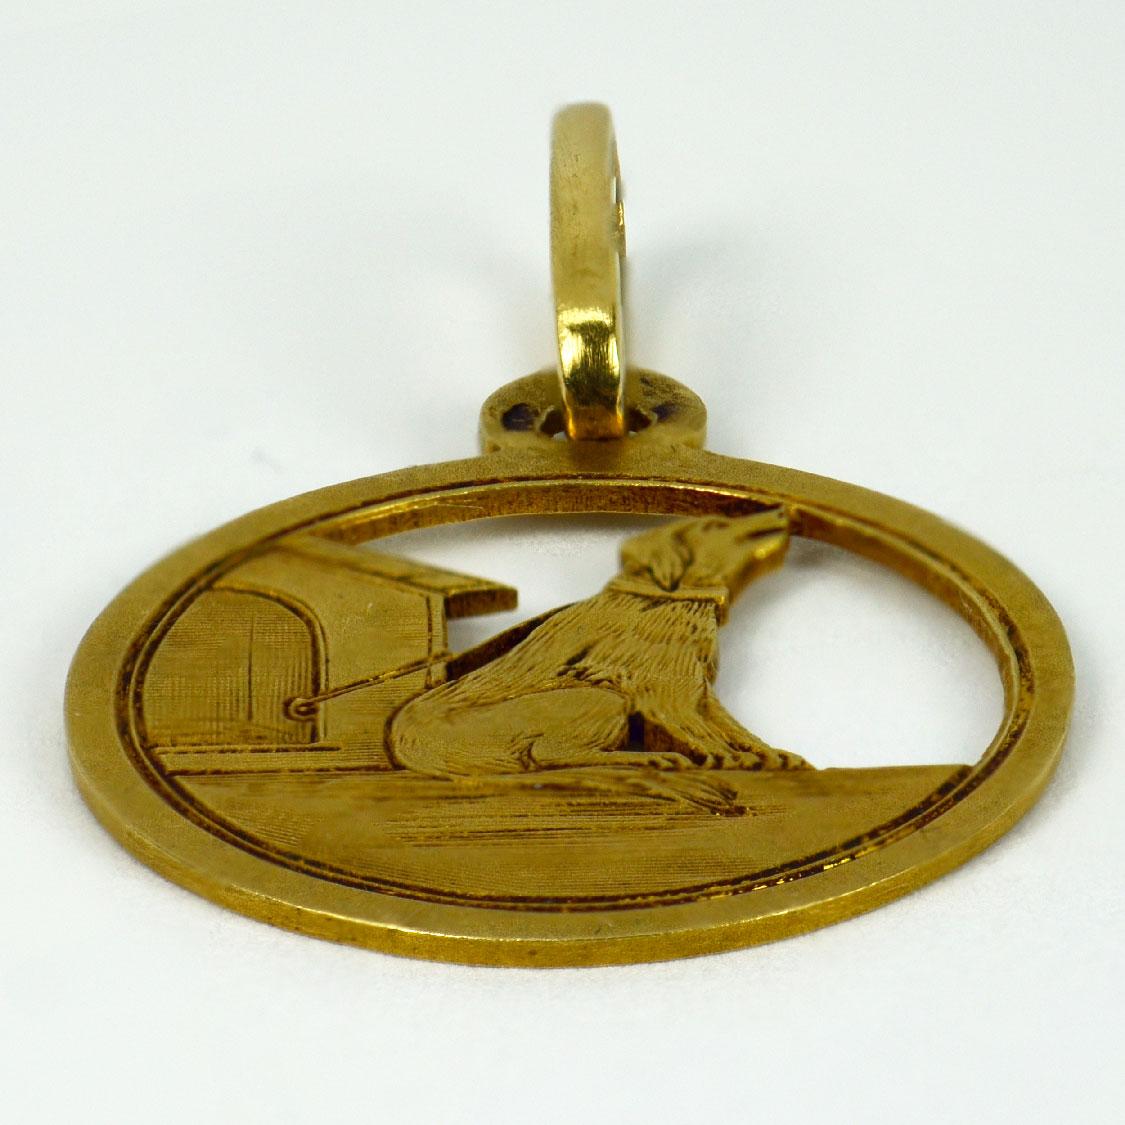 A French 18 karat (18K) yellow gold charm pendant designed as a pierced disc depicting a dog outside its dog house. Stamped with the eagles head for French manufacture and 18 karat gold with an unknown maker’s mark.

Dimensions: 2.3 x 2 x 0.5 cm